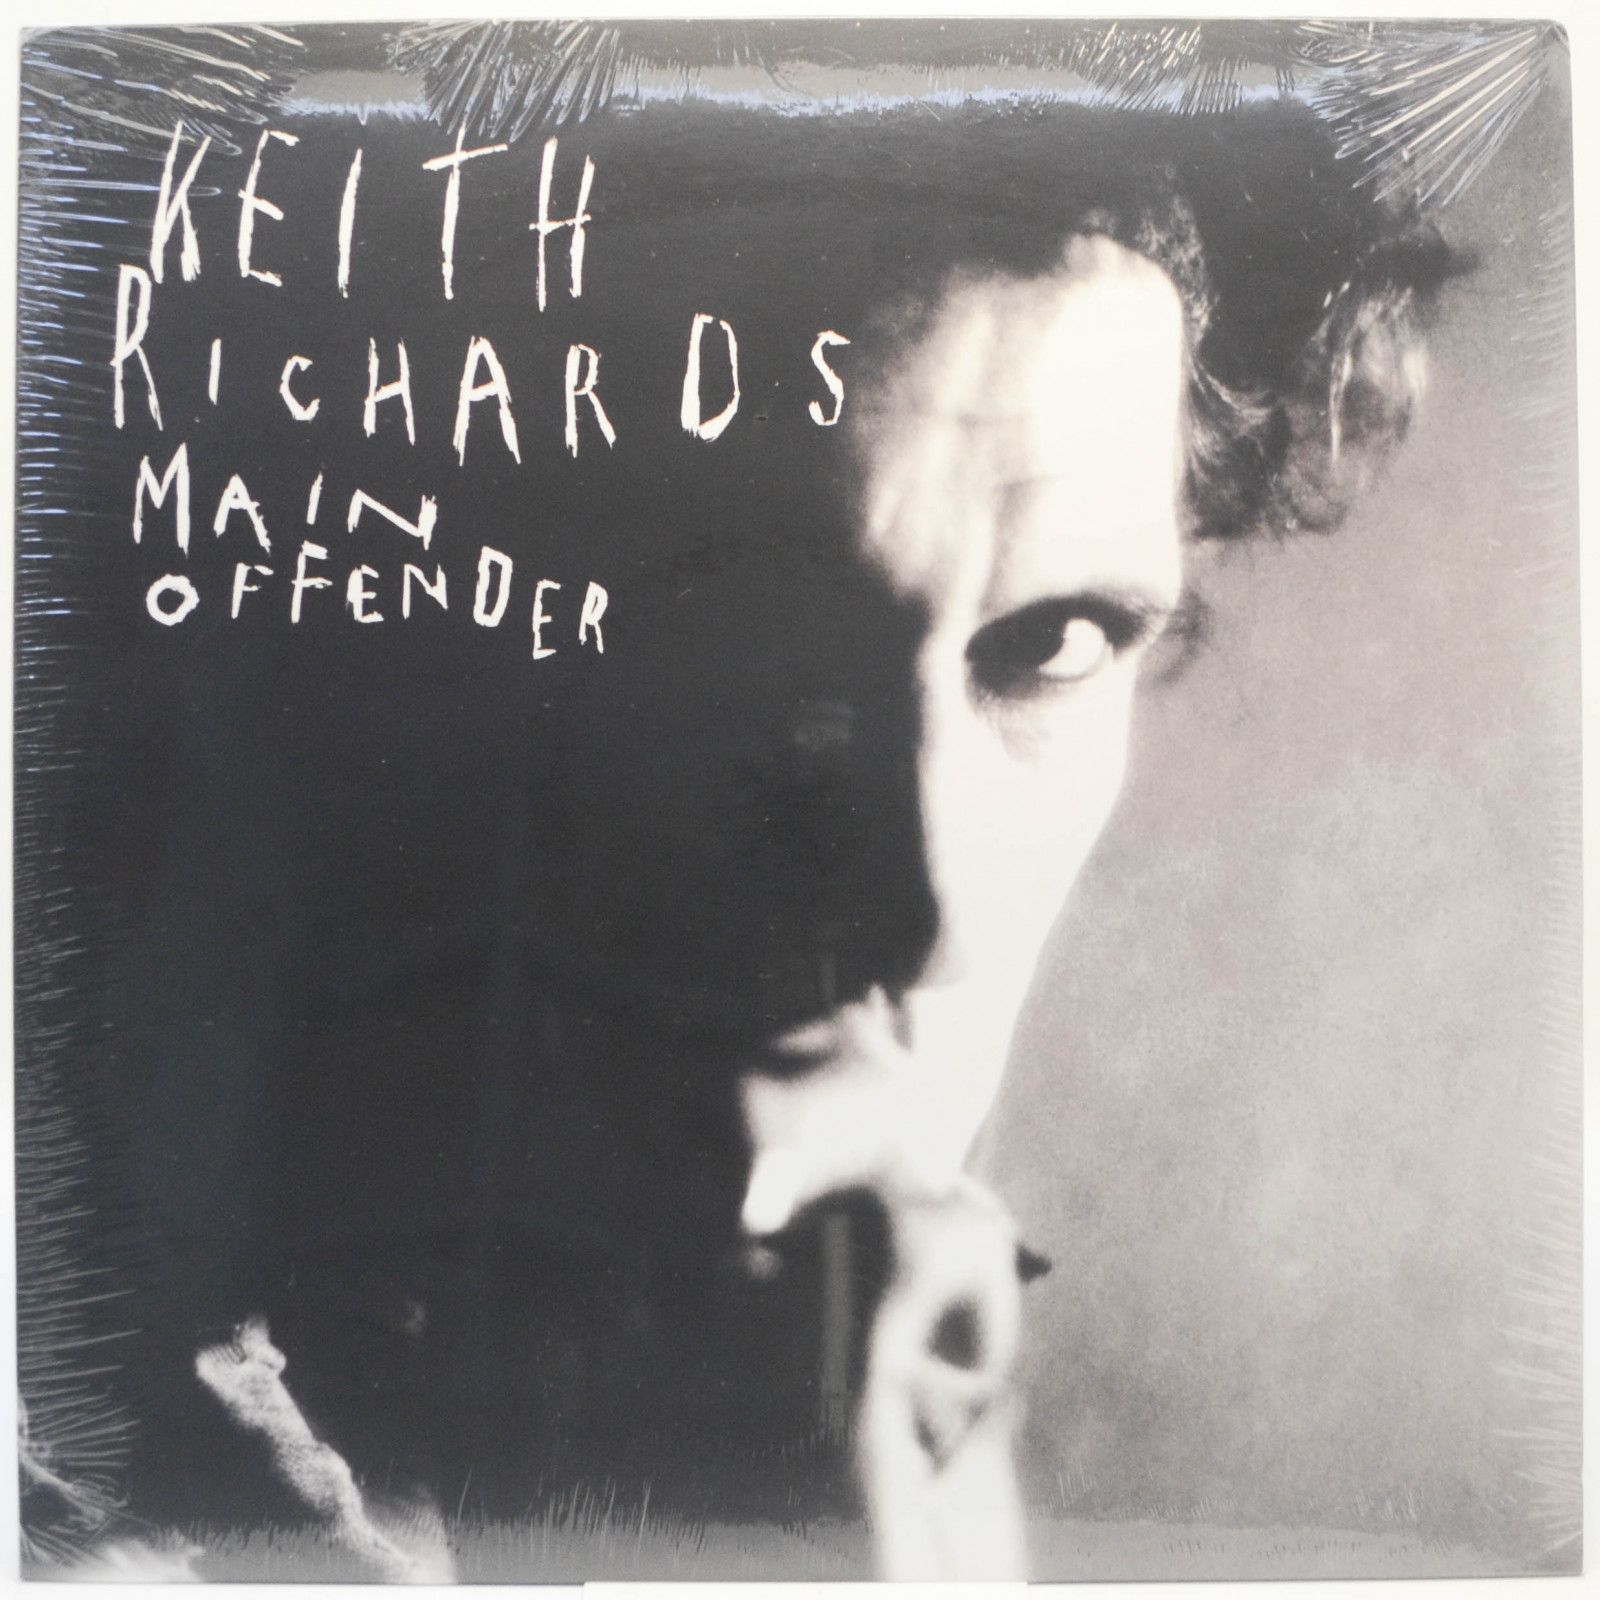 Keith Richards — Main Offender, 1992